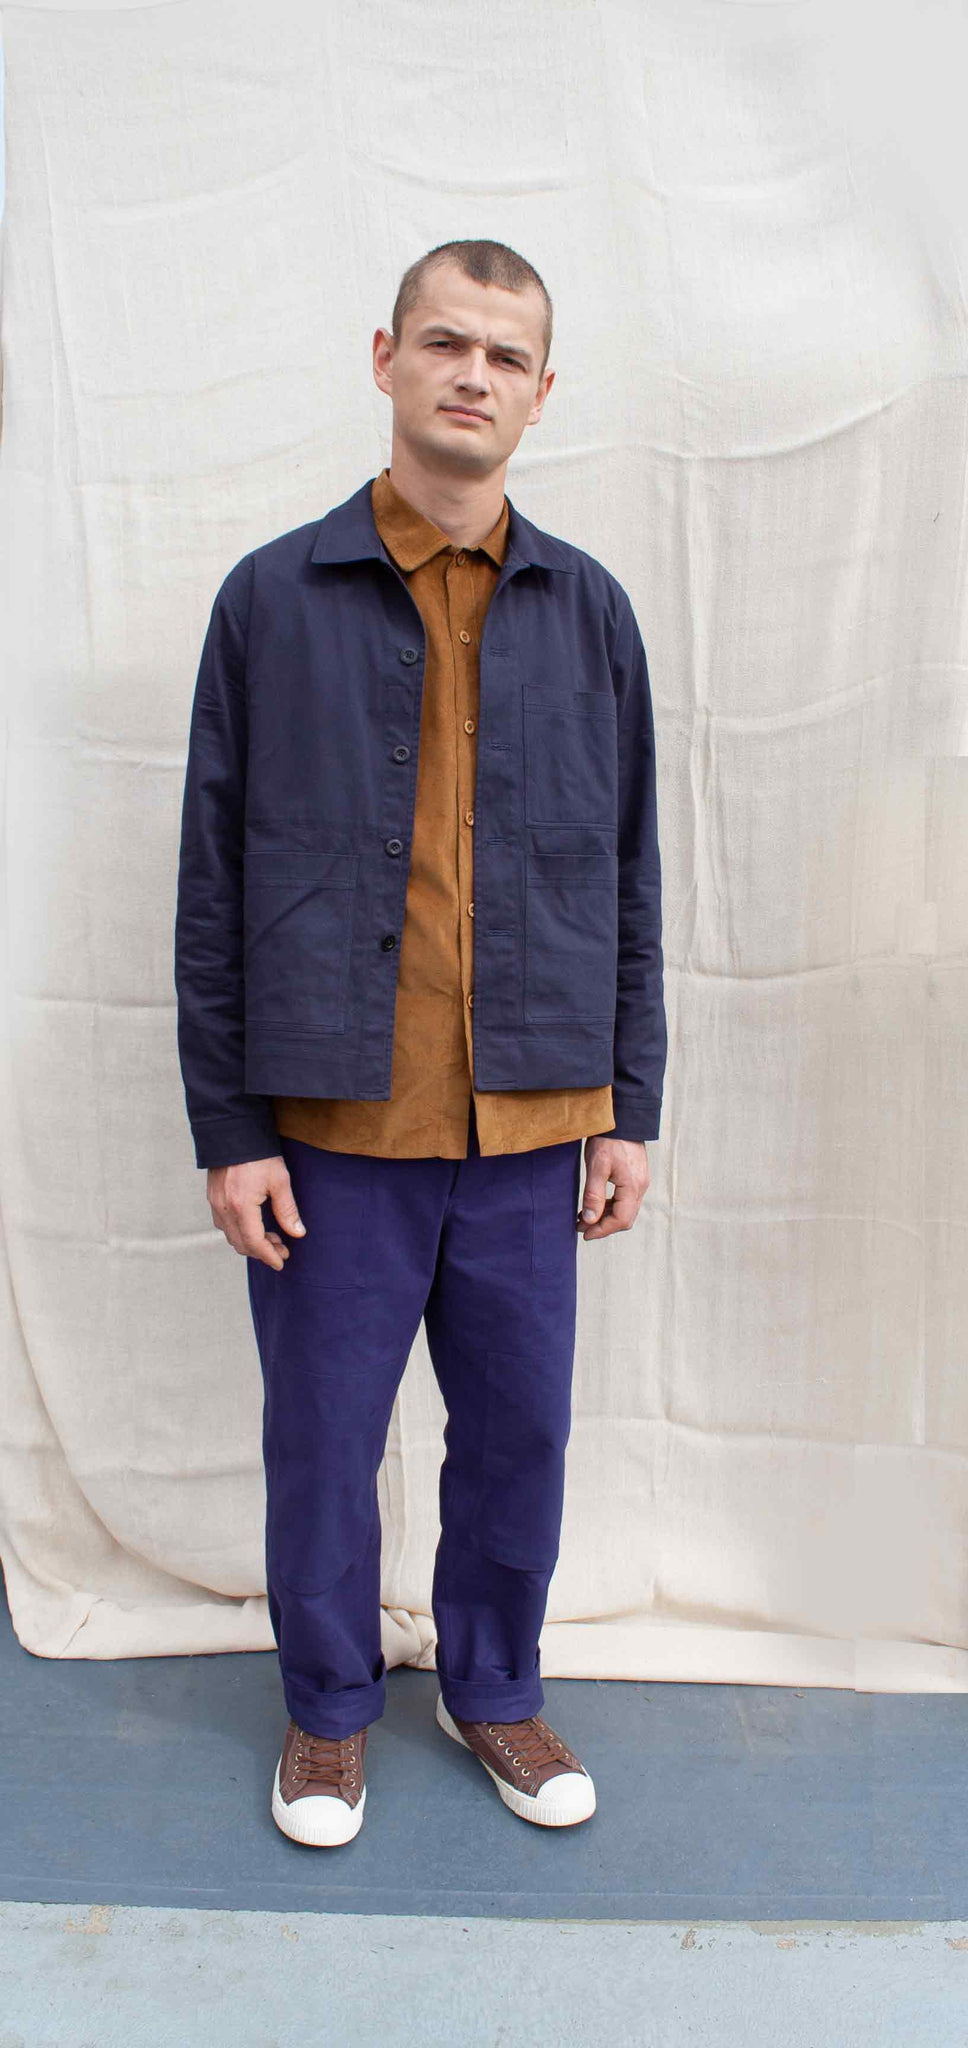 The Everyday jacket in brushed cotton twill - soft navy